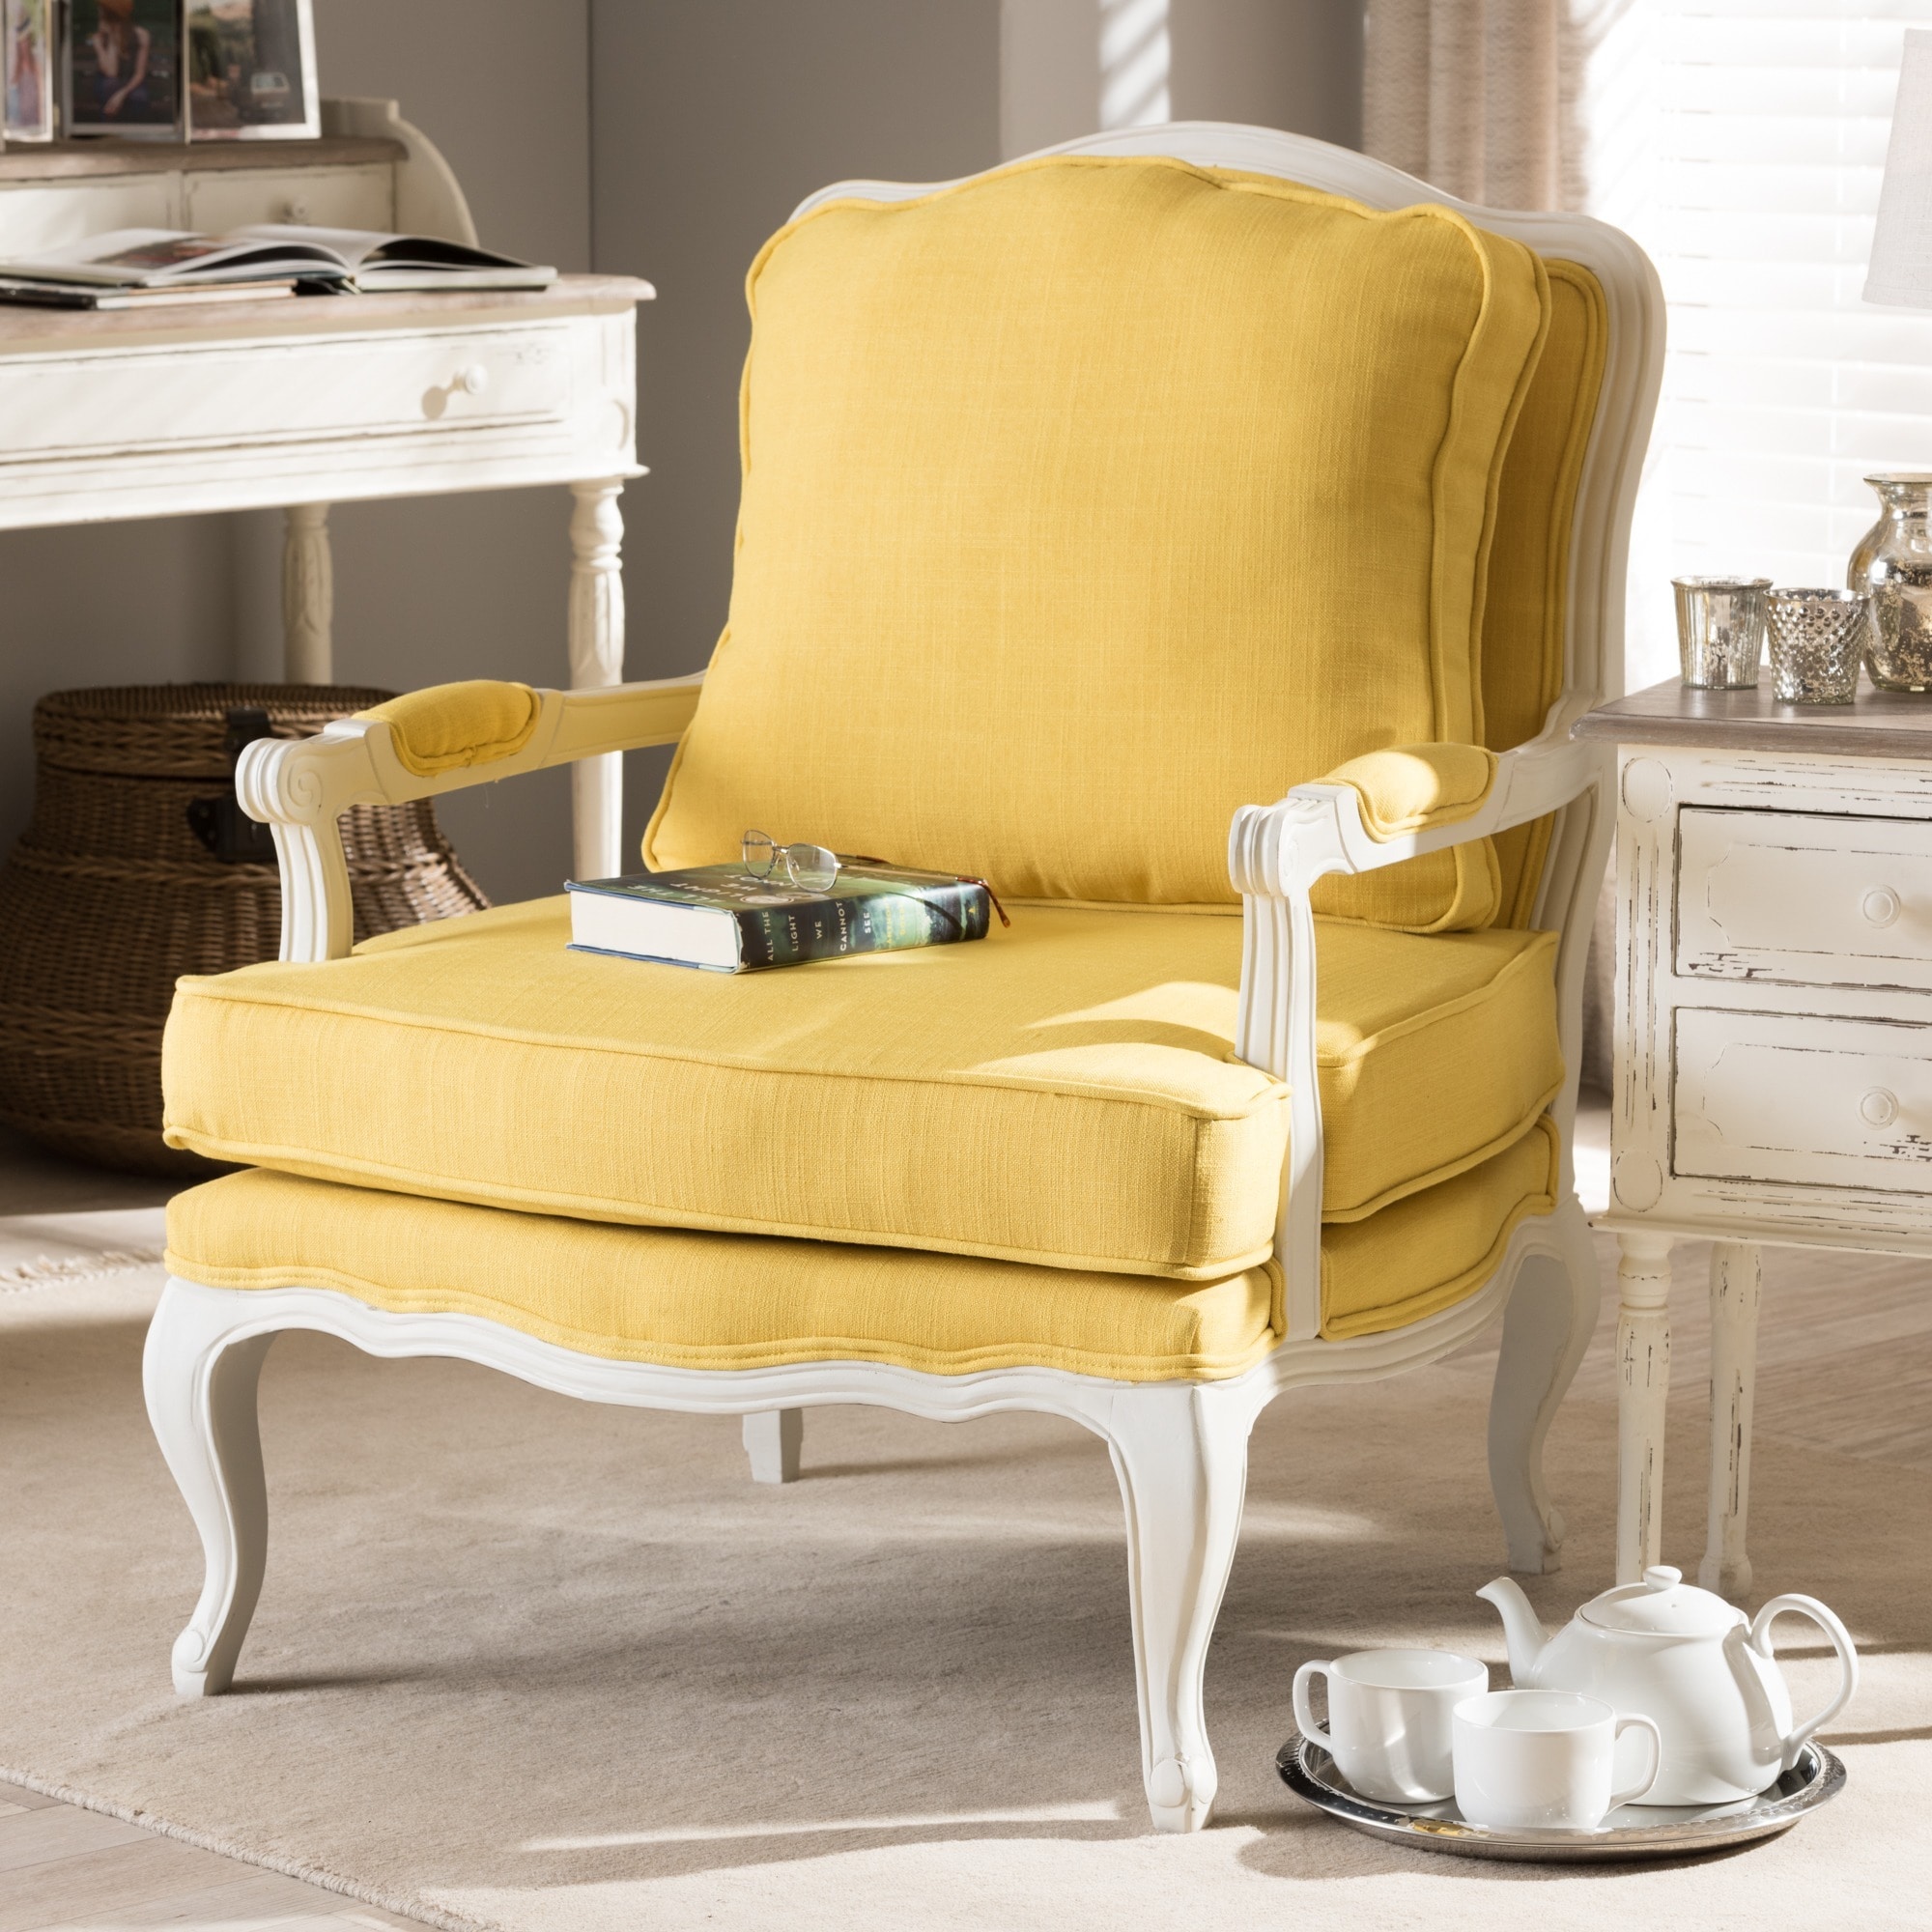 Antoinette Traditional Classic Antiqued French Yellow Accent Chair 8d413b5a D316 43cc A2bb 900fd656444c 